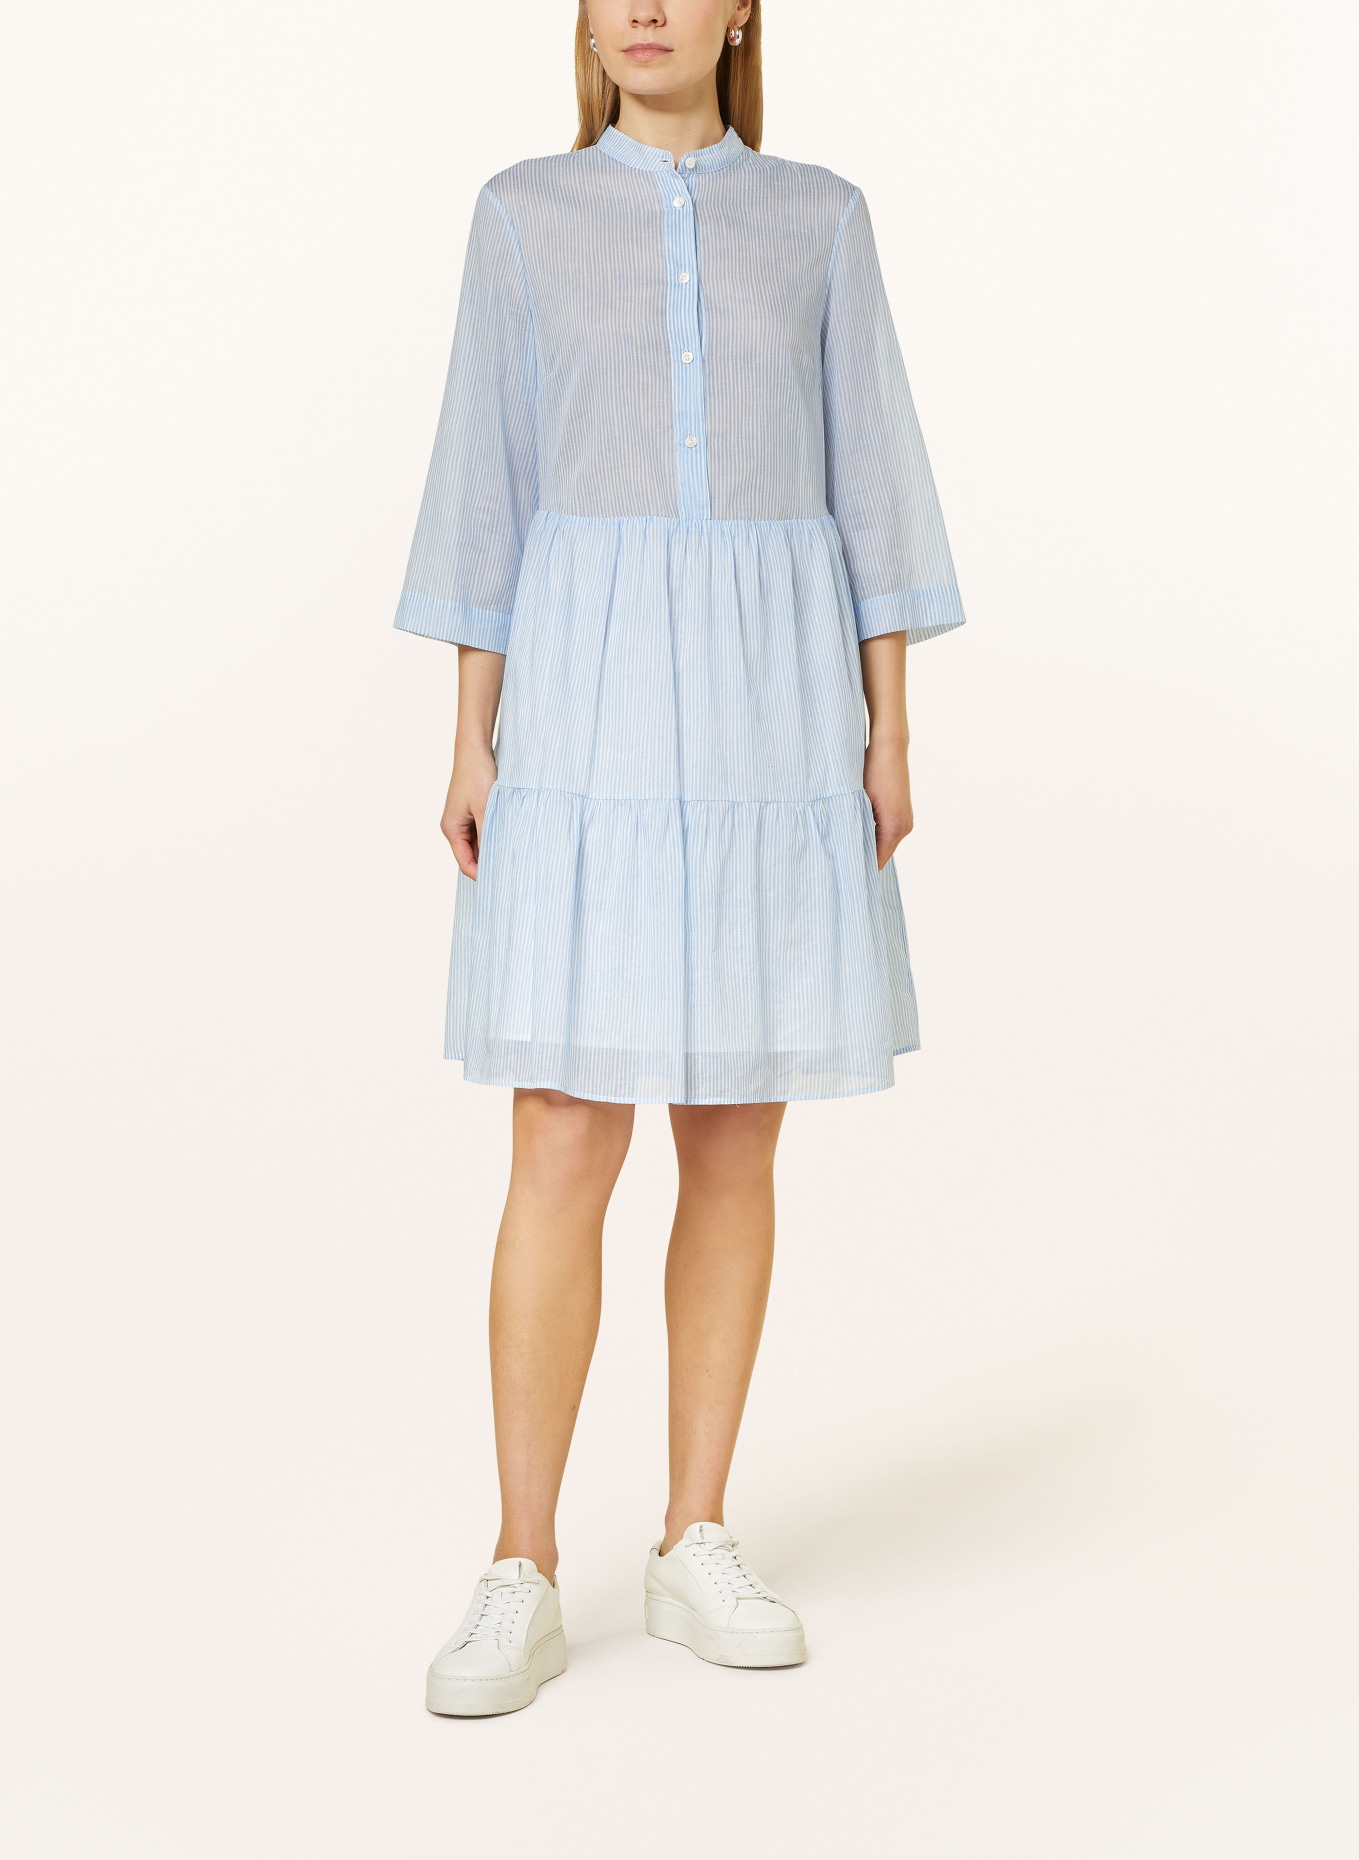 ELENA MIRO Dress with 3/4 sleeves, Color: LIGHT BLUE/ WHITE (Image 2)